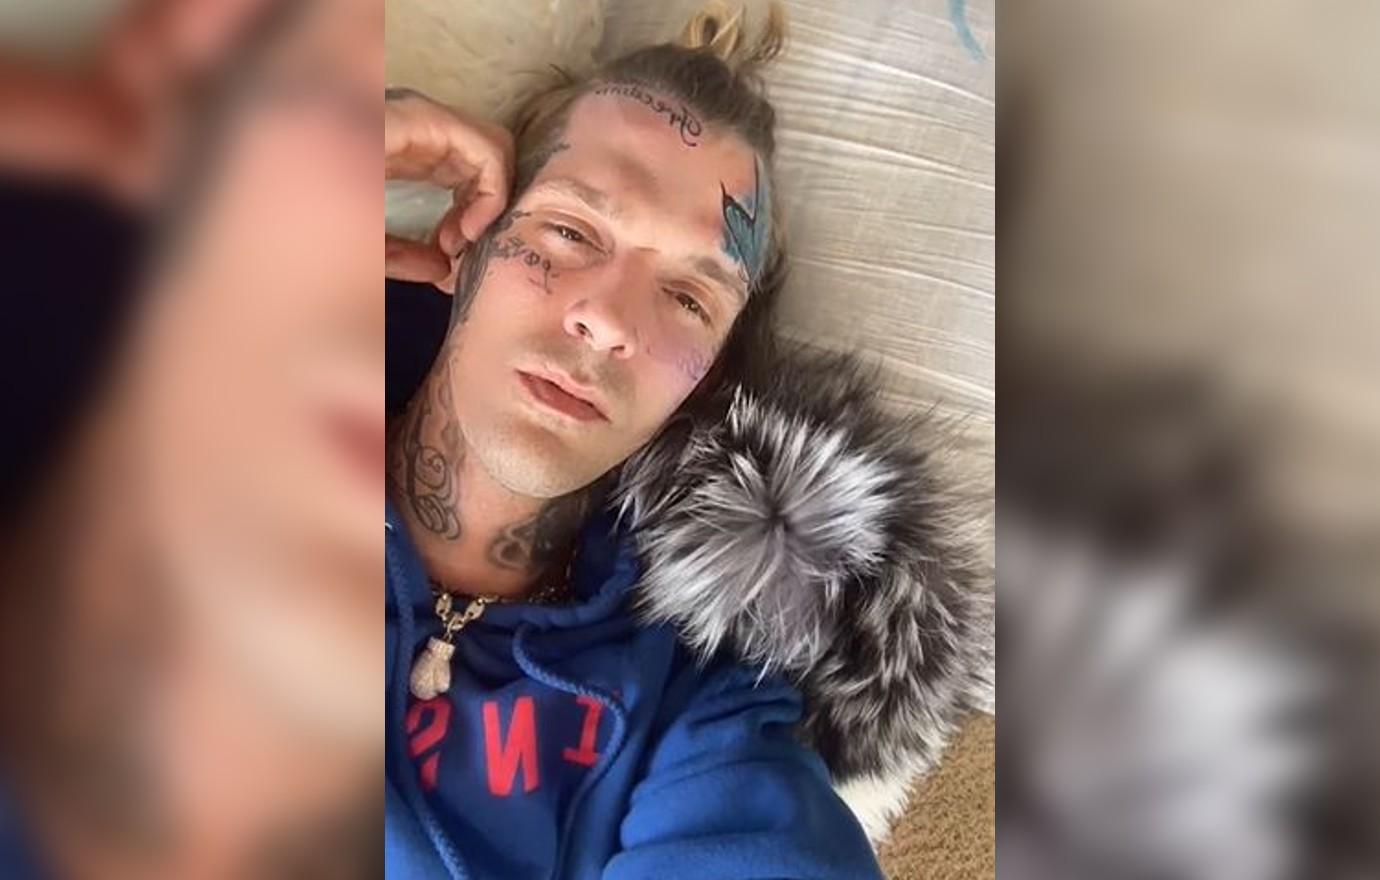 Aaron Carter Face Tattoos Meanings Why He Got the Ink